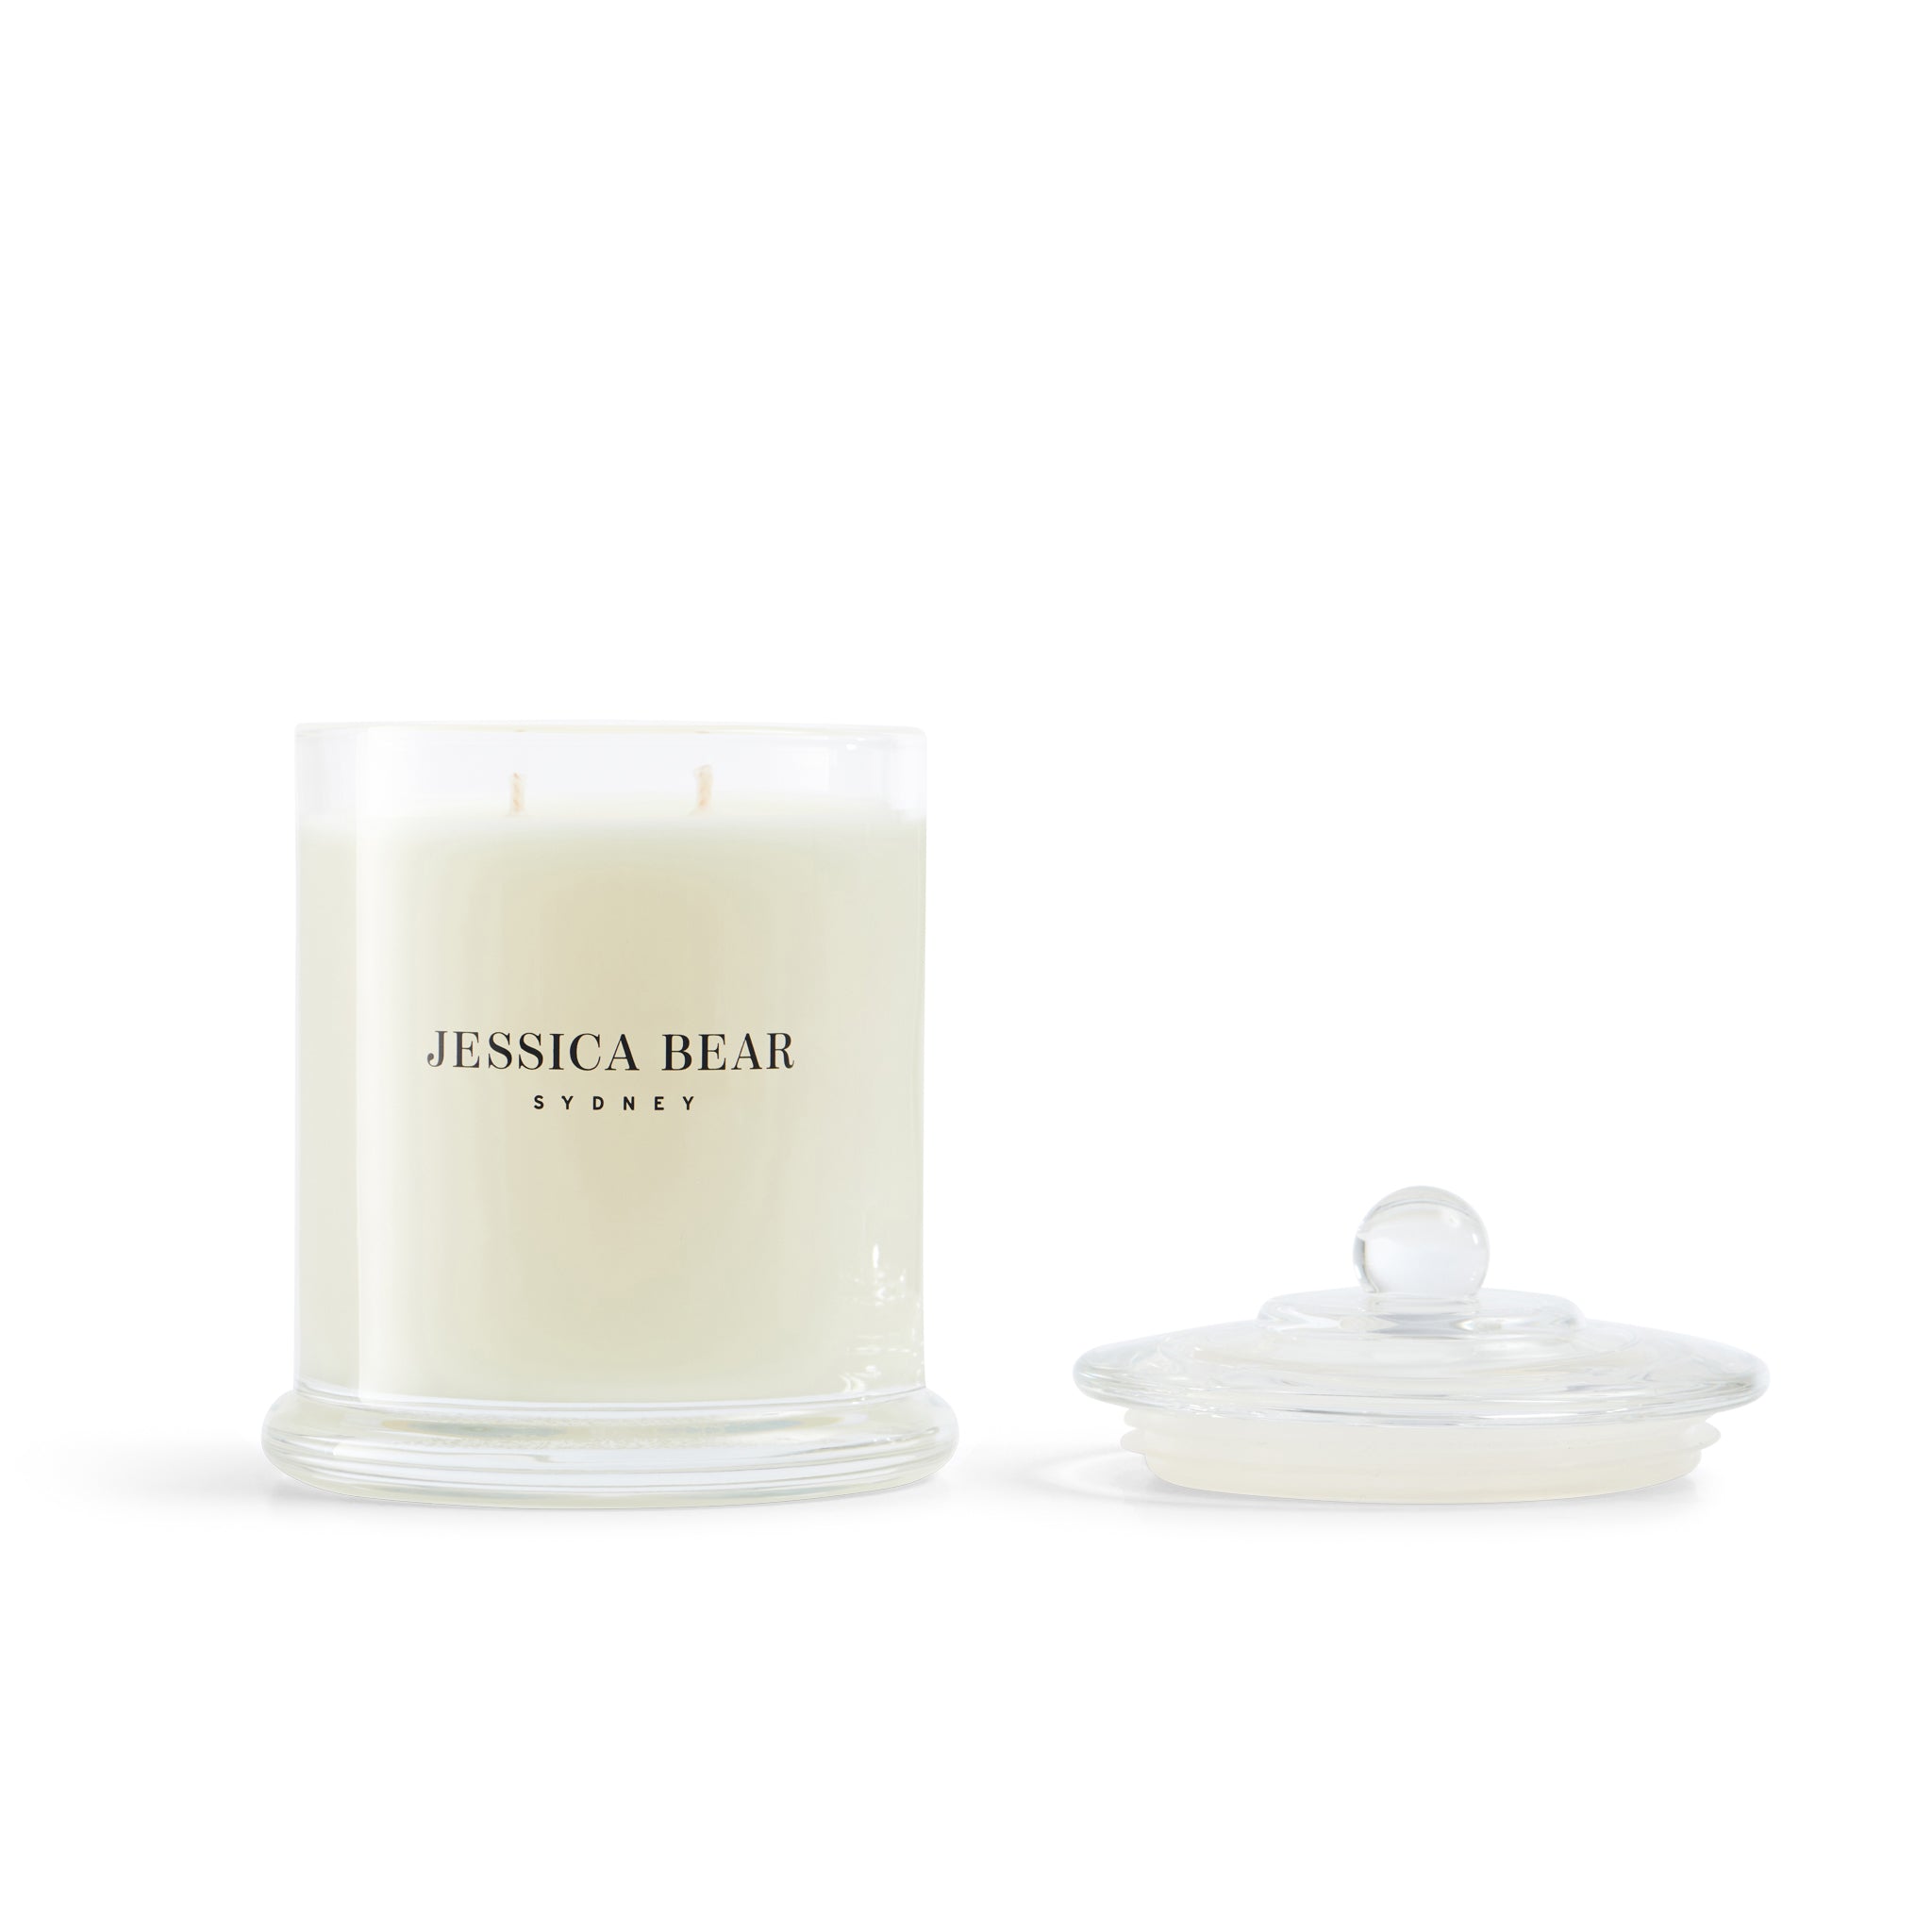 April Rose - 380g Scented Candle